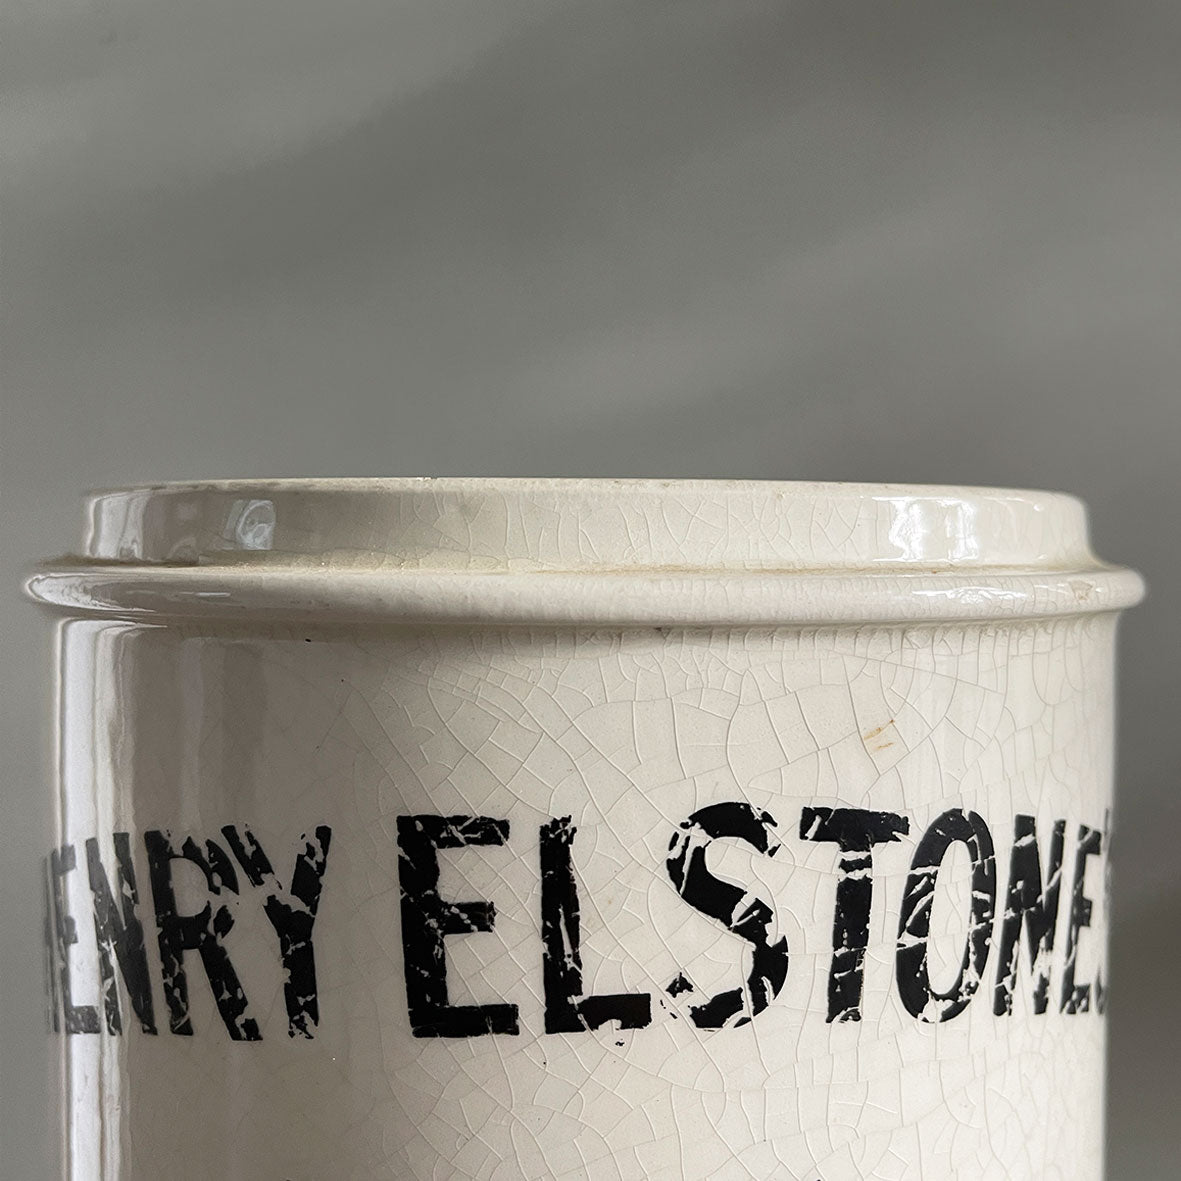 A great looking Henry Elstone's White glazed Tobacco Jar from the Edwardian Period with wonderful distressed type to the front - SHOP NOW - www.intovintage.co.uk